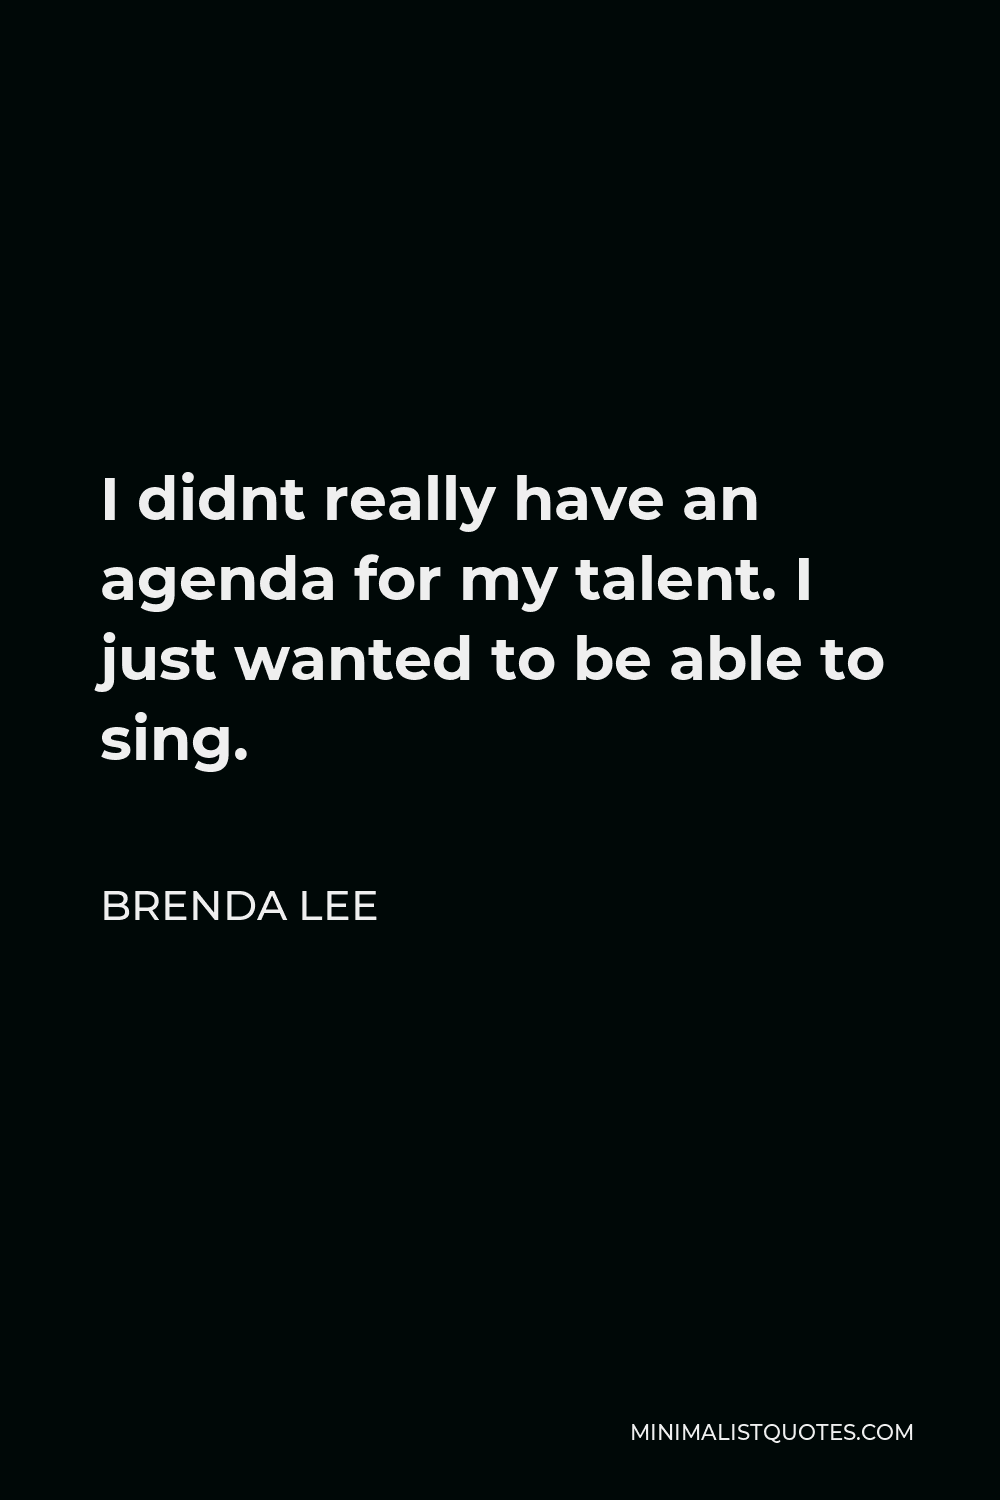 Brenda Lee Quote - I didnt really have an agenda for my talent. I just wanted to be able to sing.